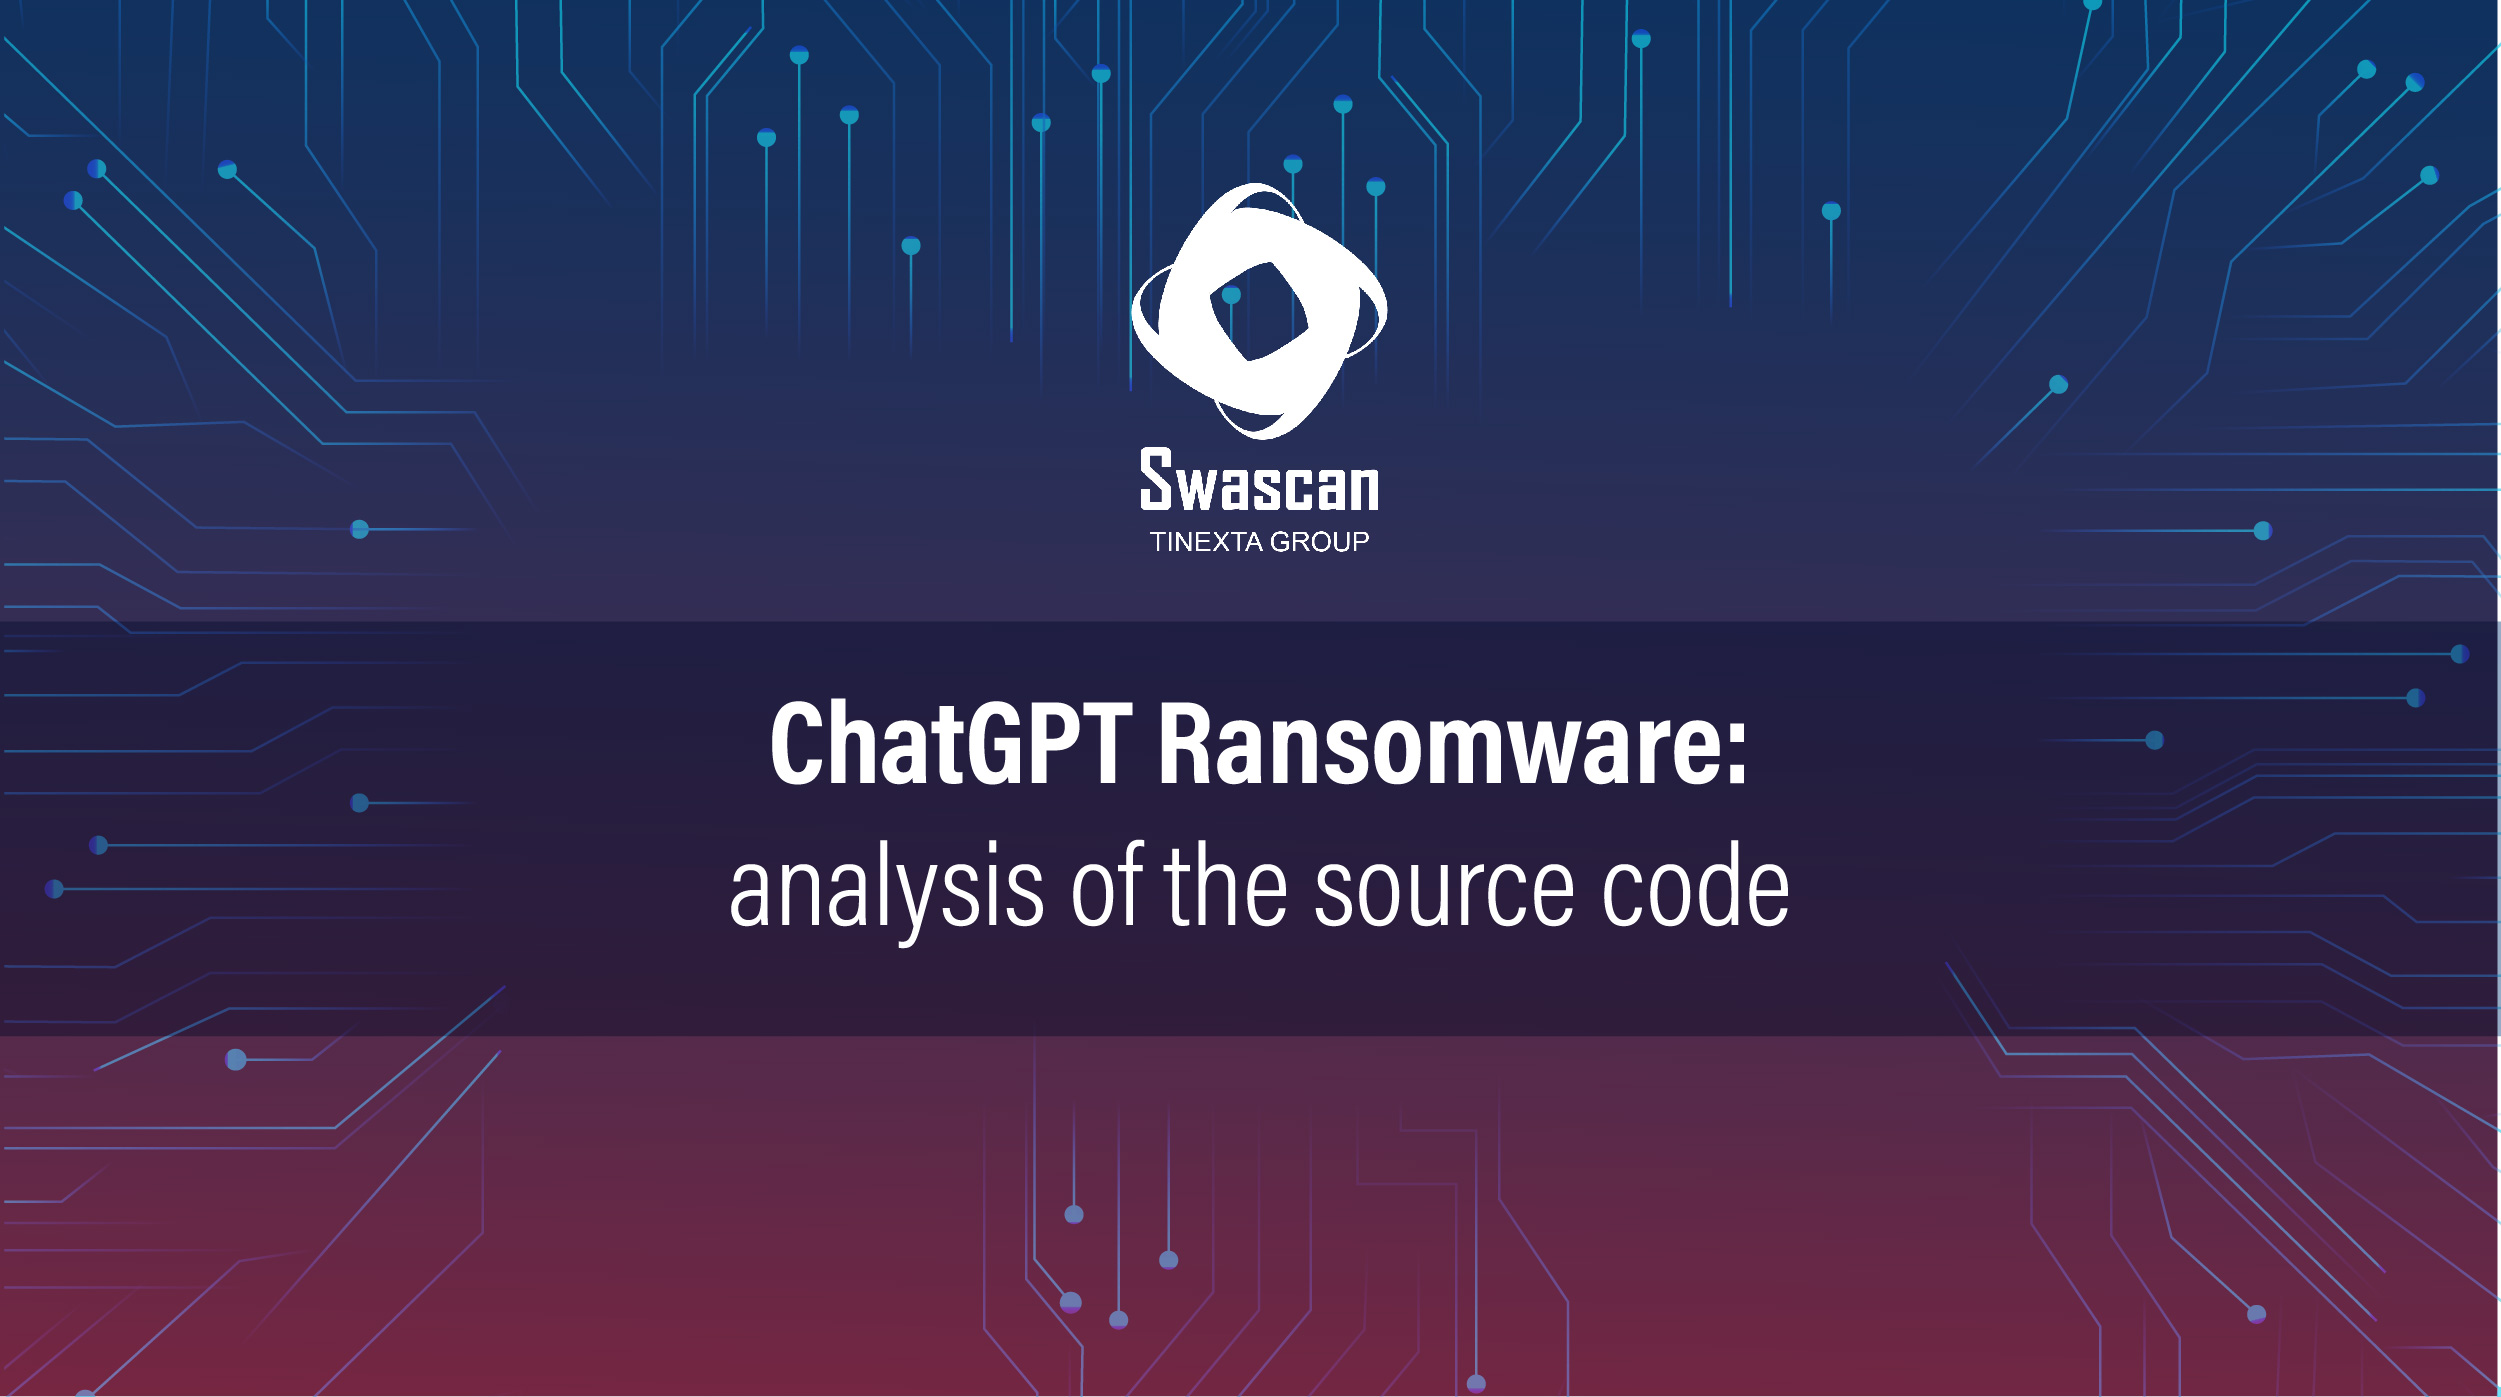 ChatGPT Ransomware: analysis of the source code